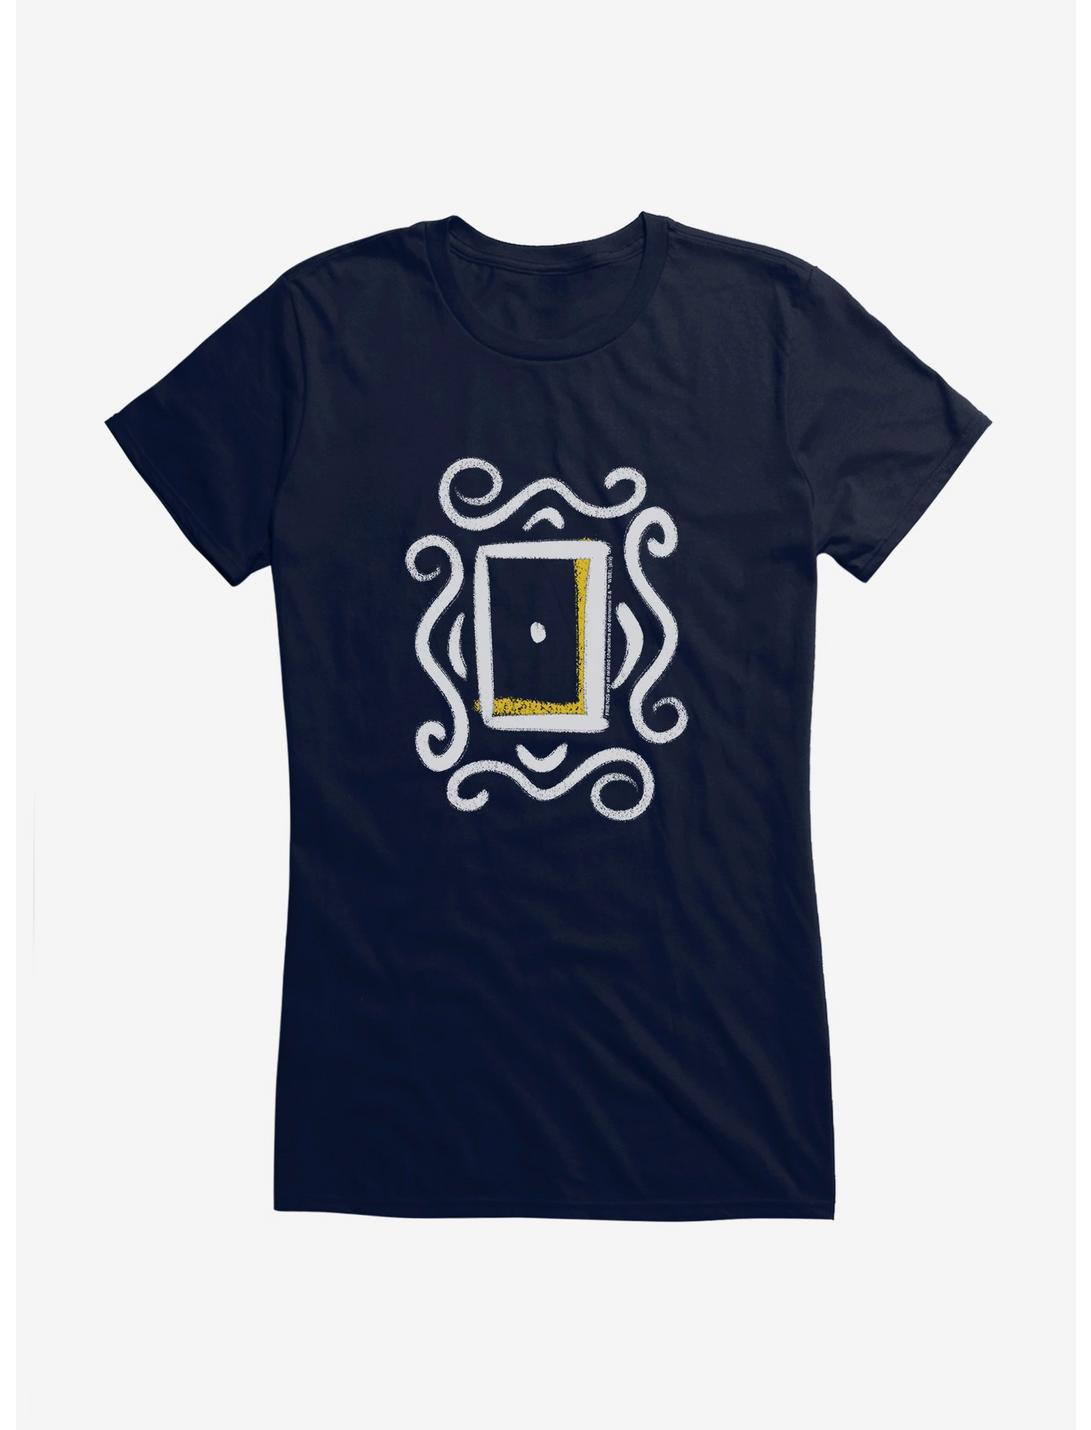 Friends Frame Icon Girls T-Shirt, NAVY, hi-res